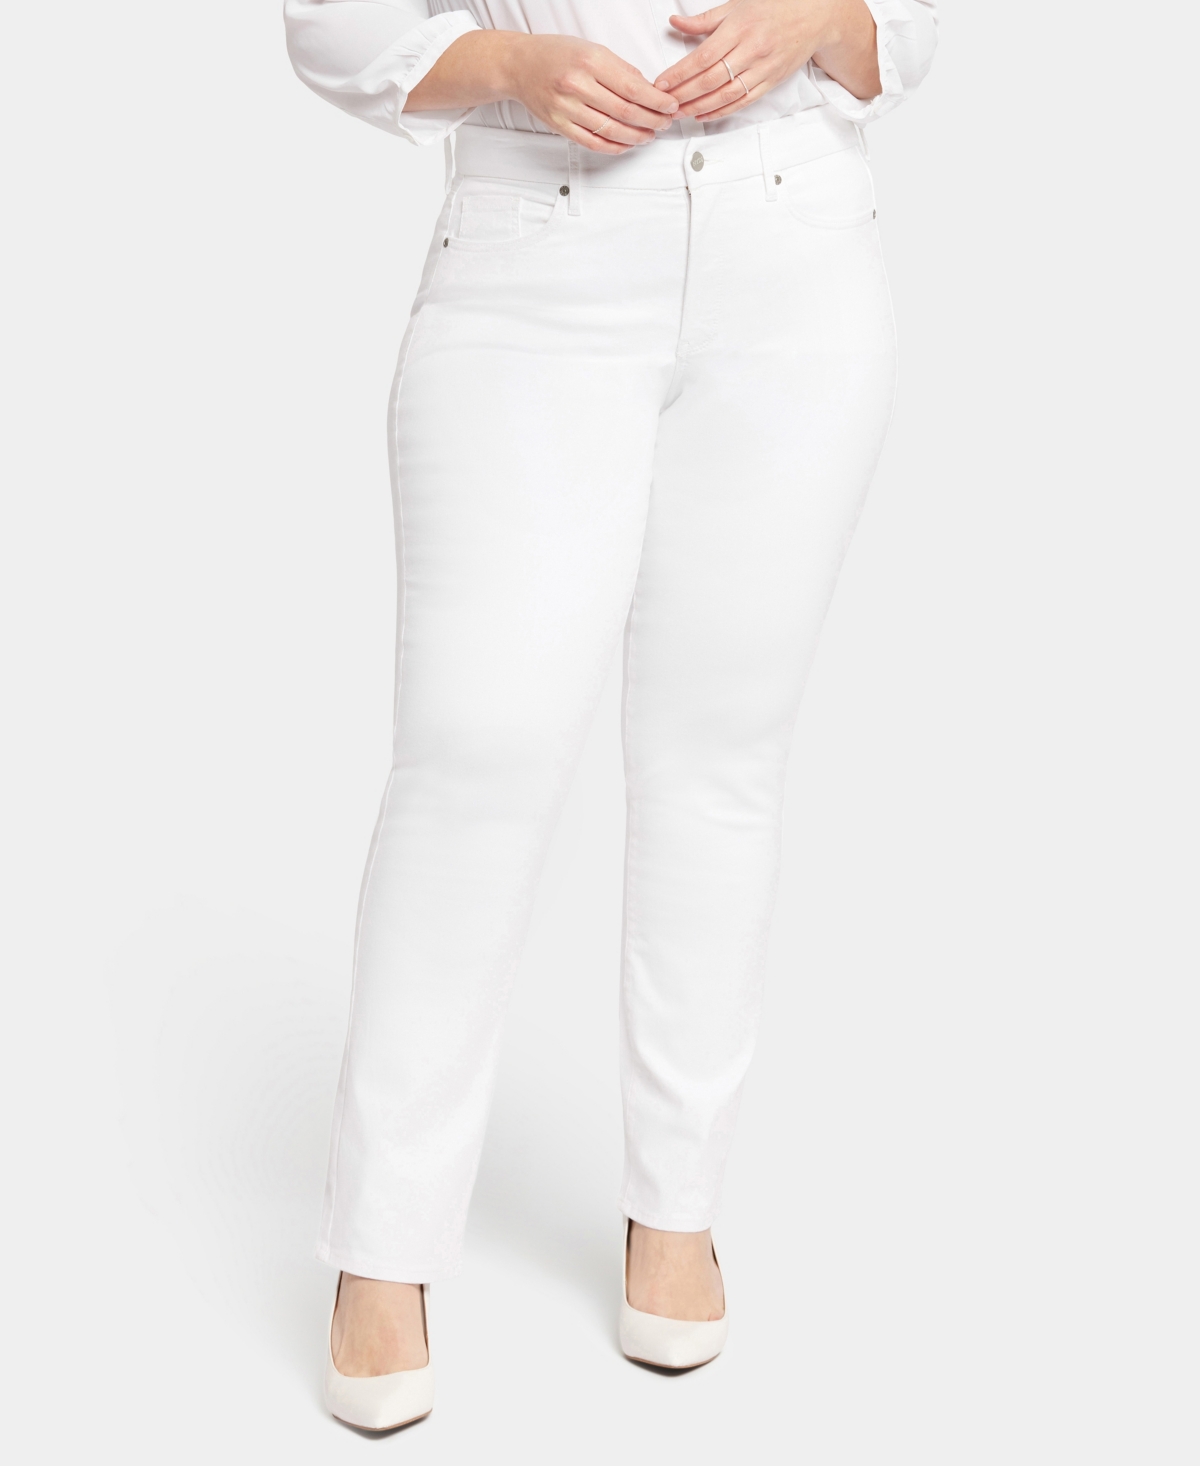 Nydj Plus Size Waist Match Marilyn Straight Jeans In Optic White